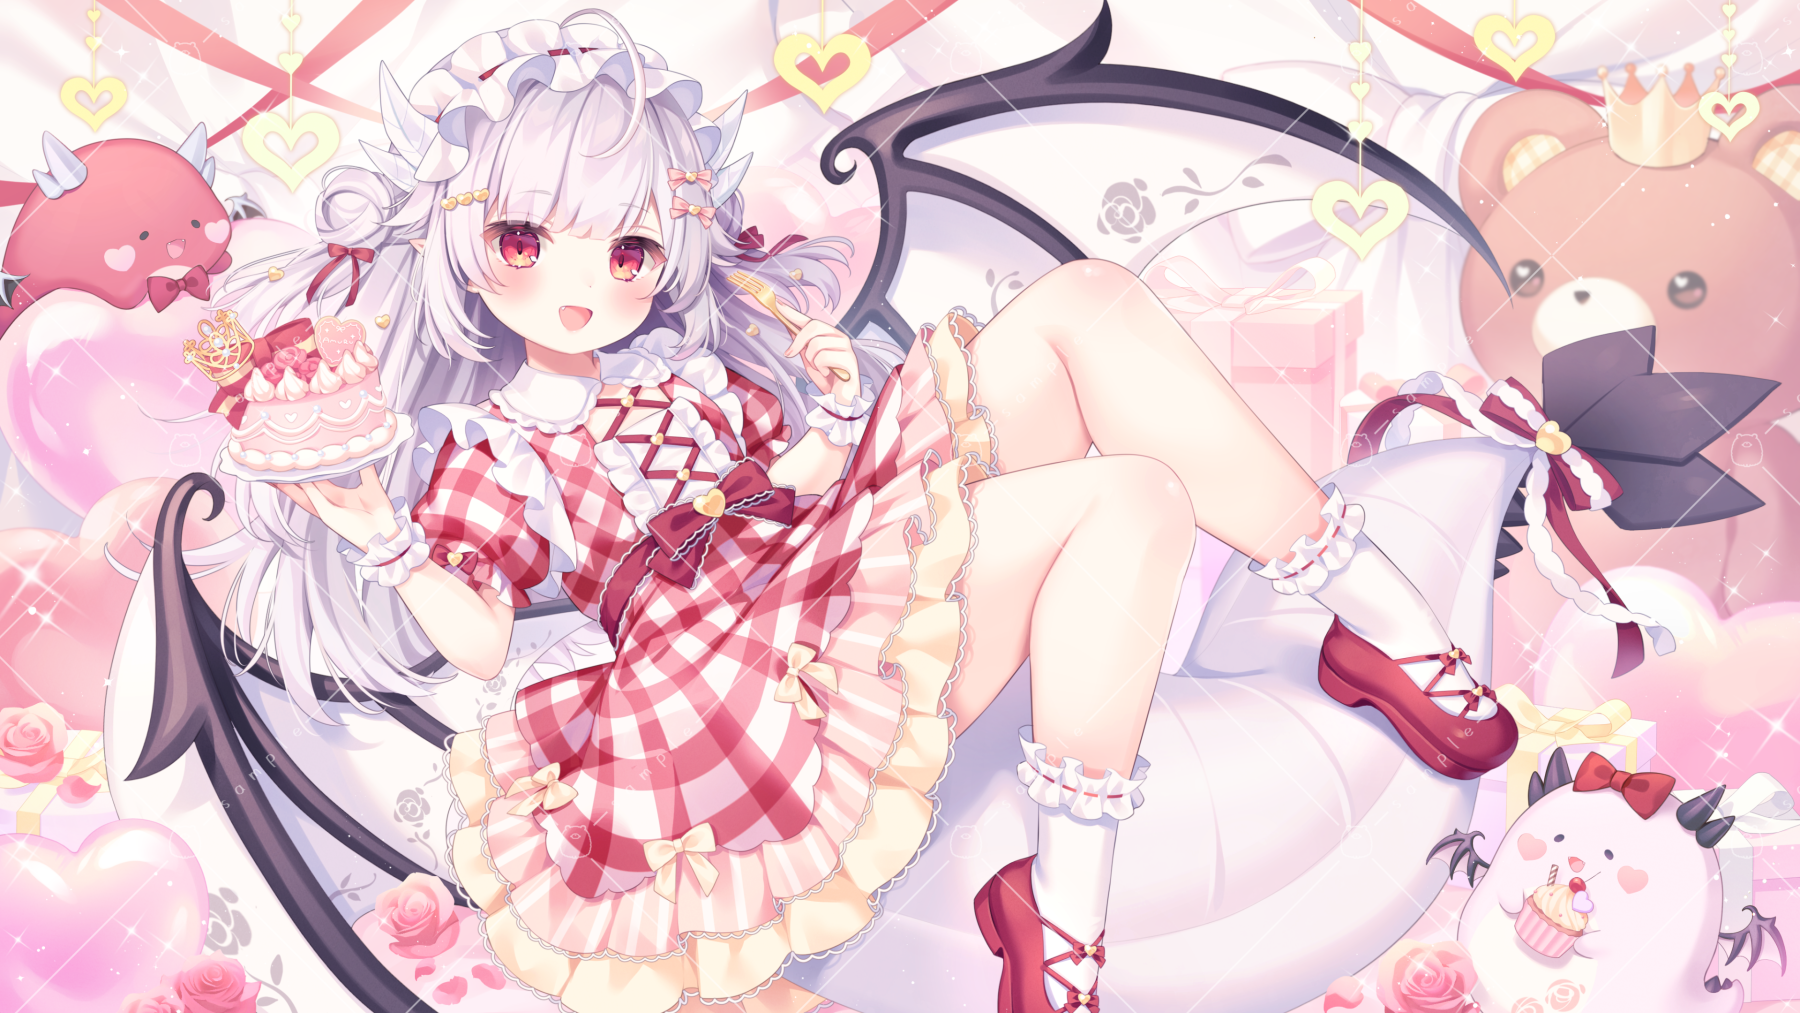 Anime Girls Anime Wings Dress Cake Shoes Teddy Bears Bow Tie Looking At Viewer Long Hair Blushing Fl 1800x1013